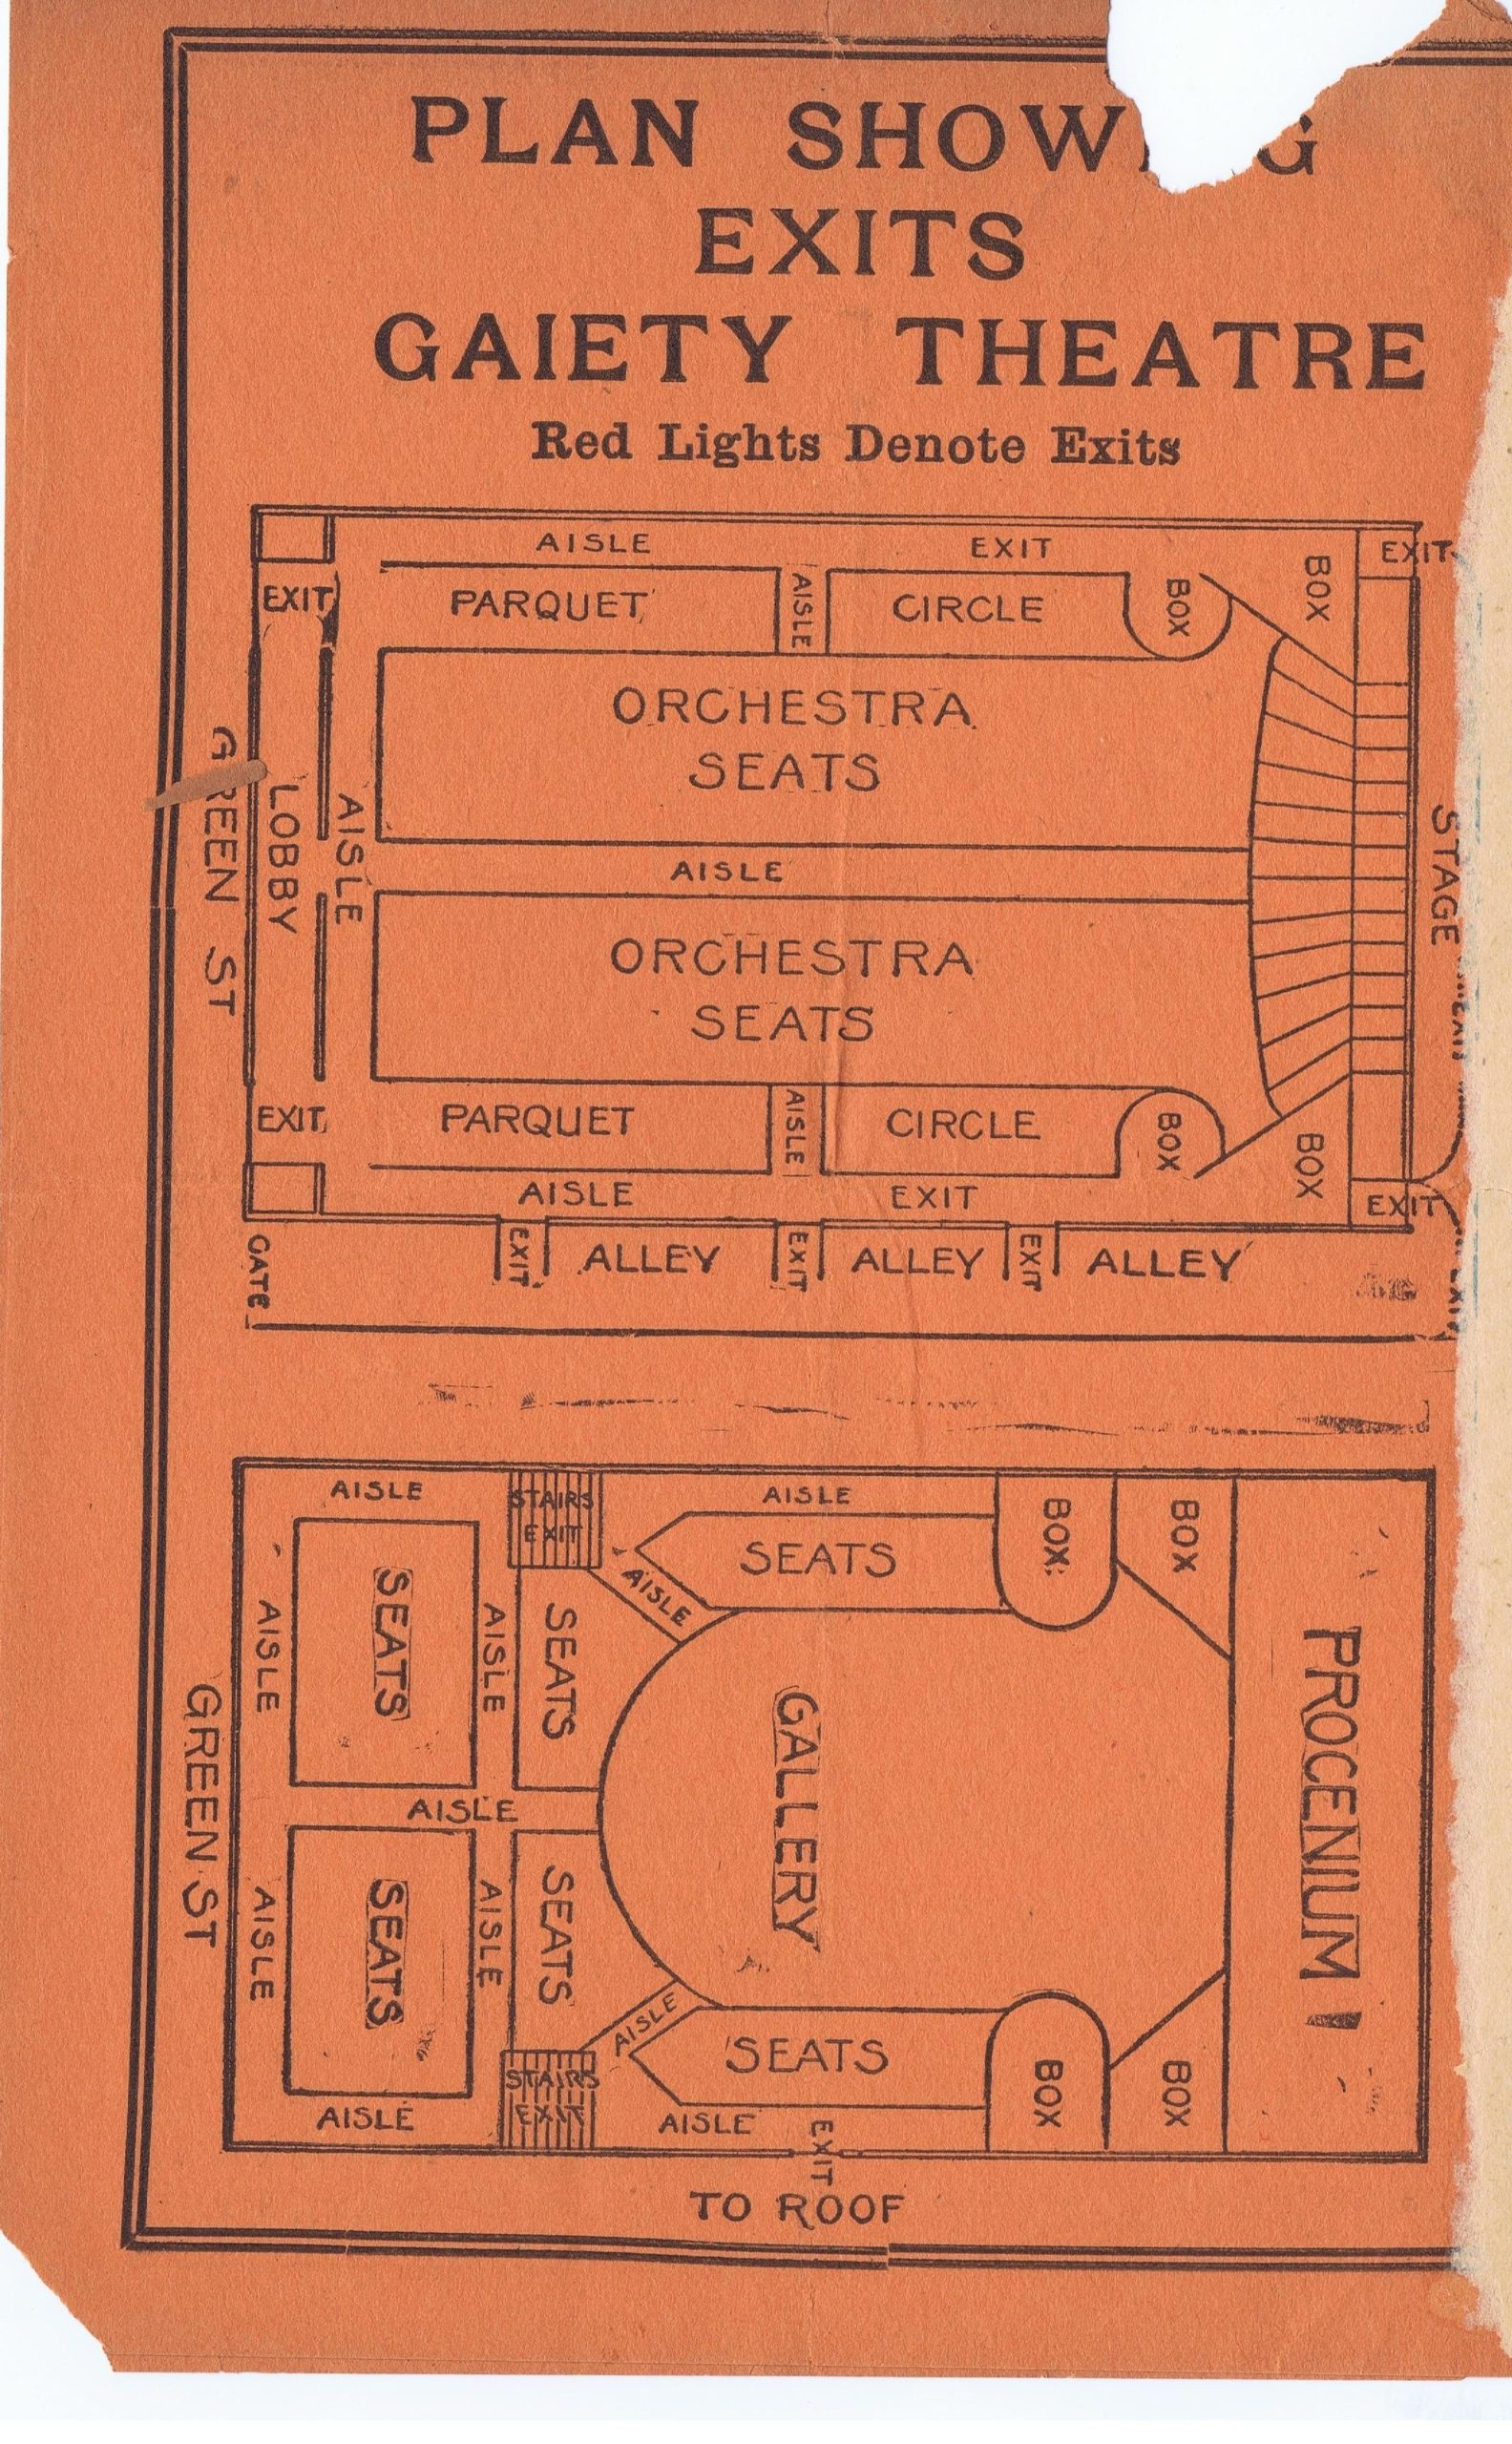 From a playbill, a plan of the Gaiety Theatre